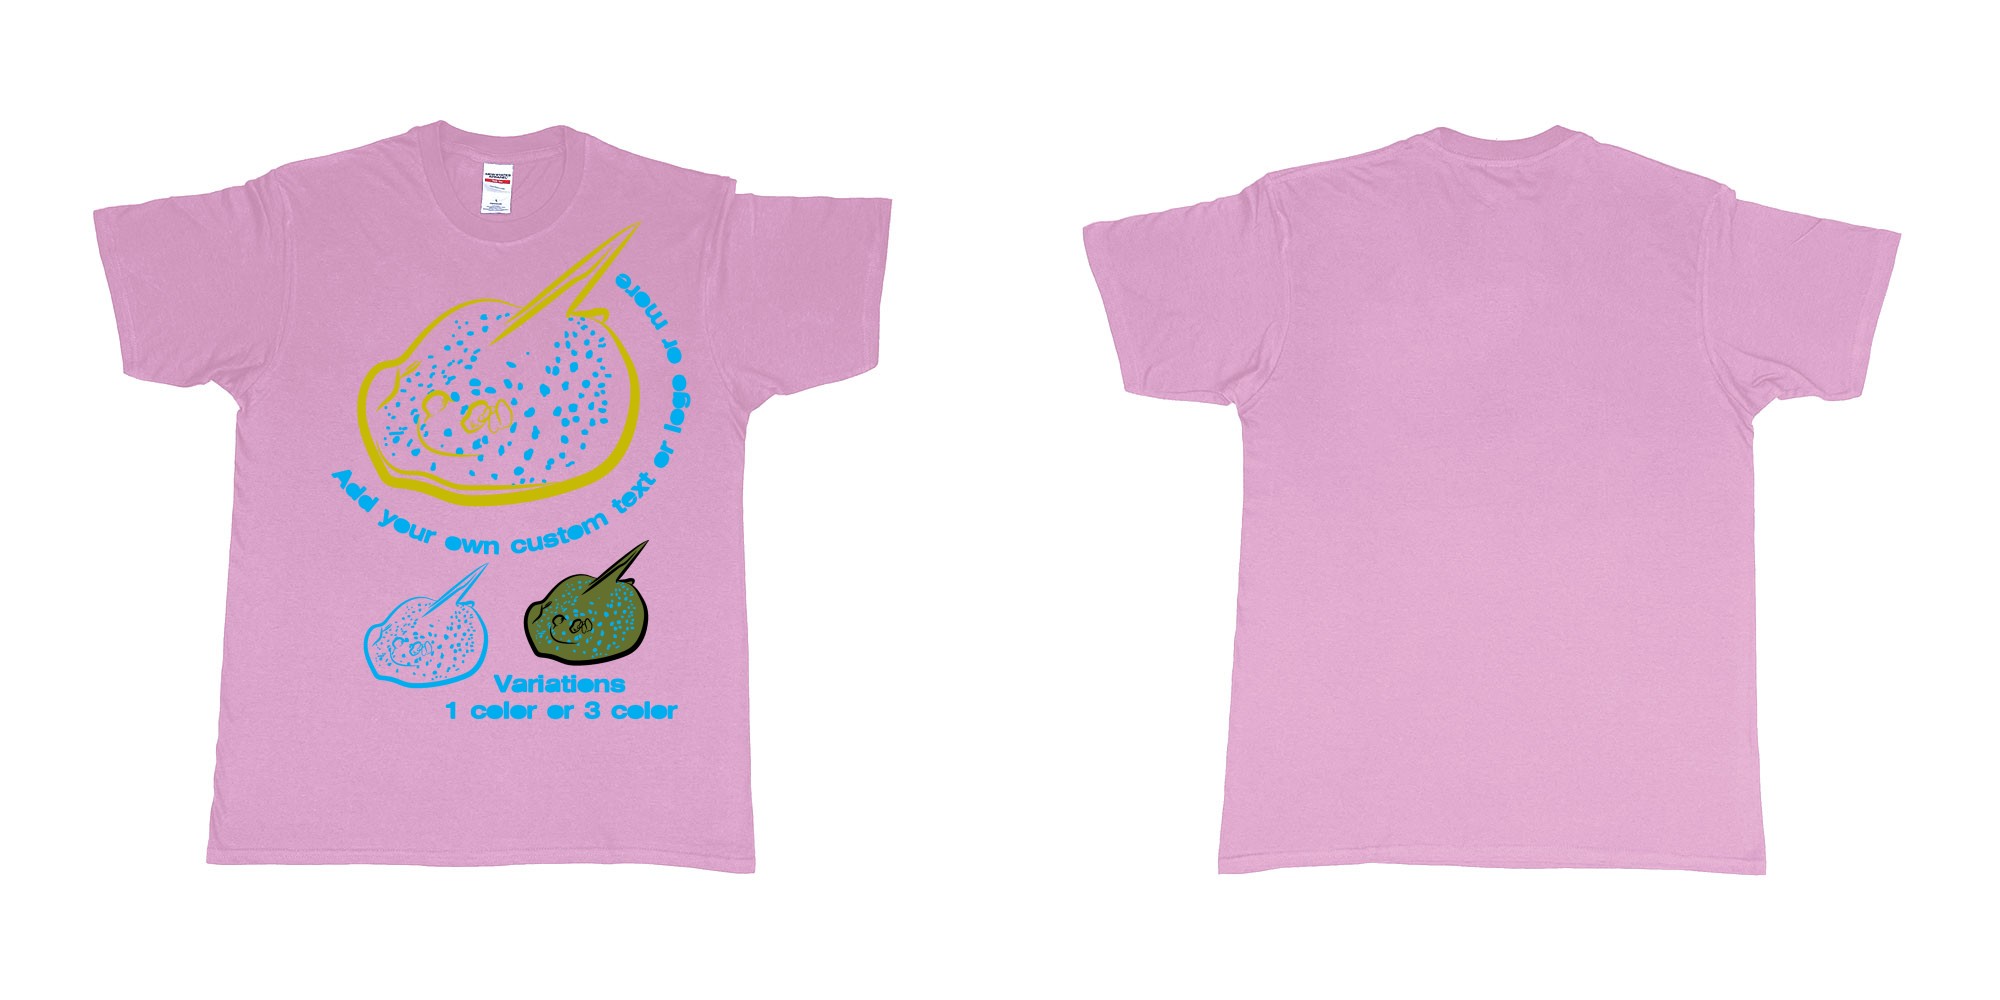 Custom tshirt design blue spotted stingray in fabric color light-pink choice your own text made in Bali by The Pirate Way